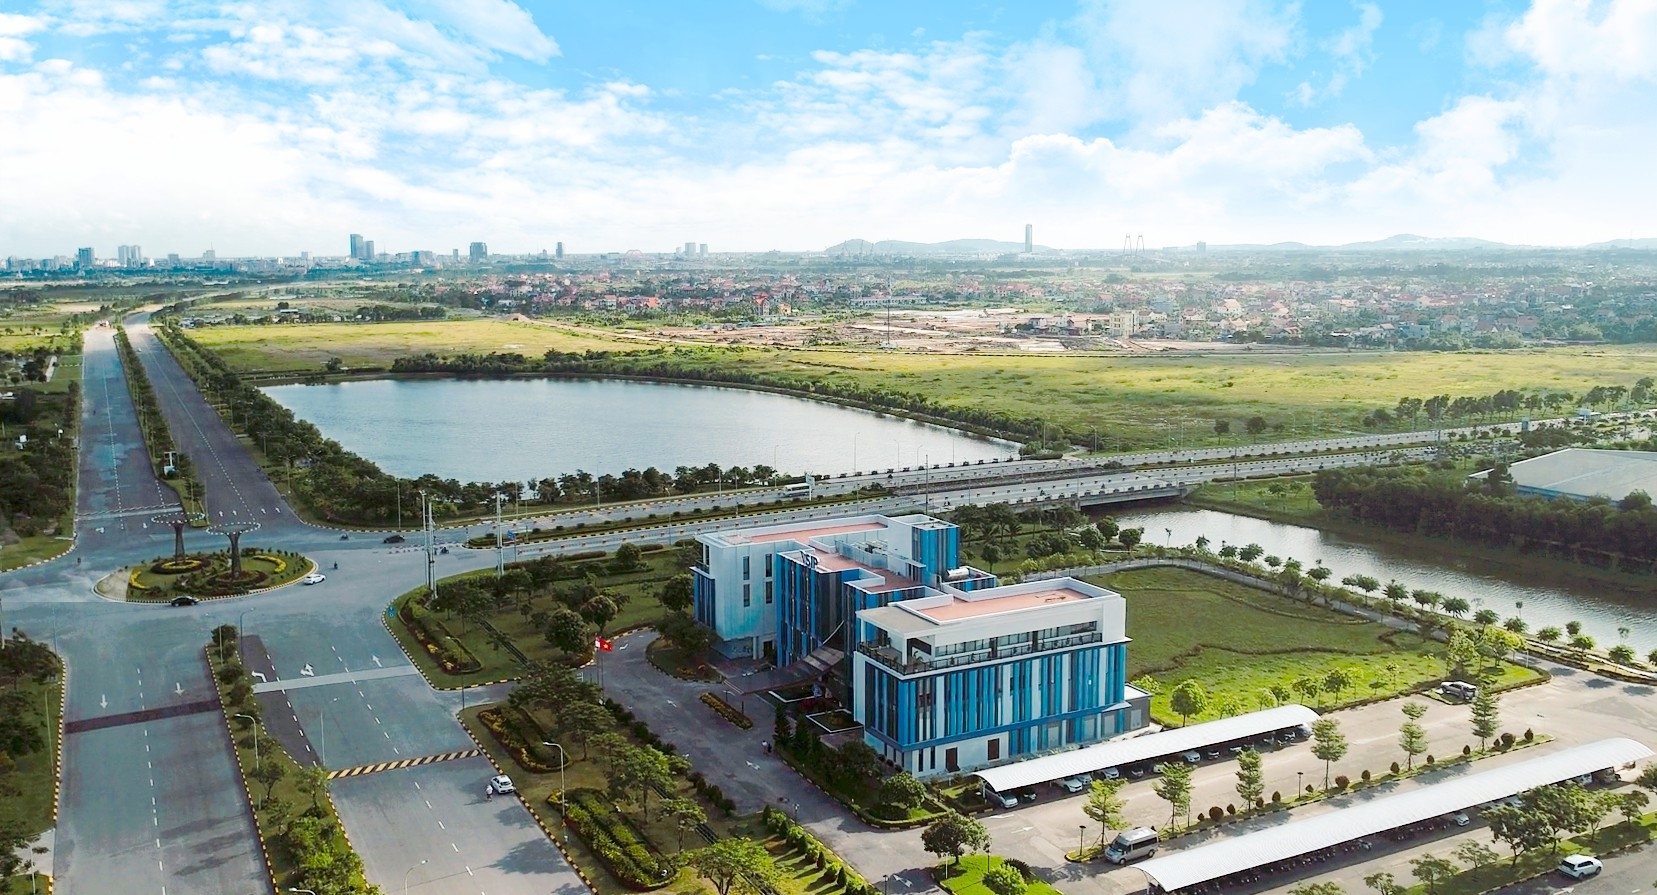 VSIP Haiphong blooms after decade of development